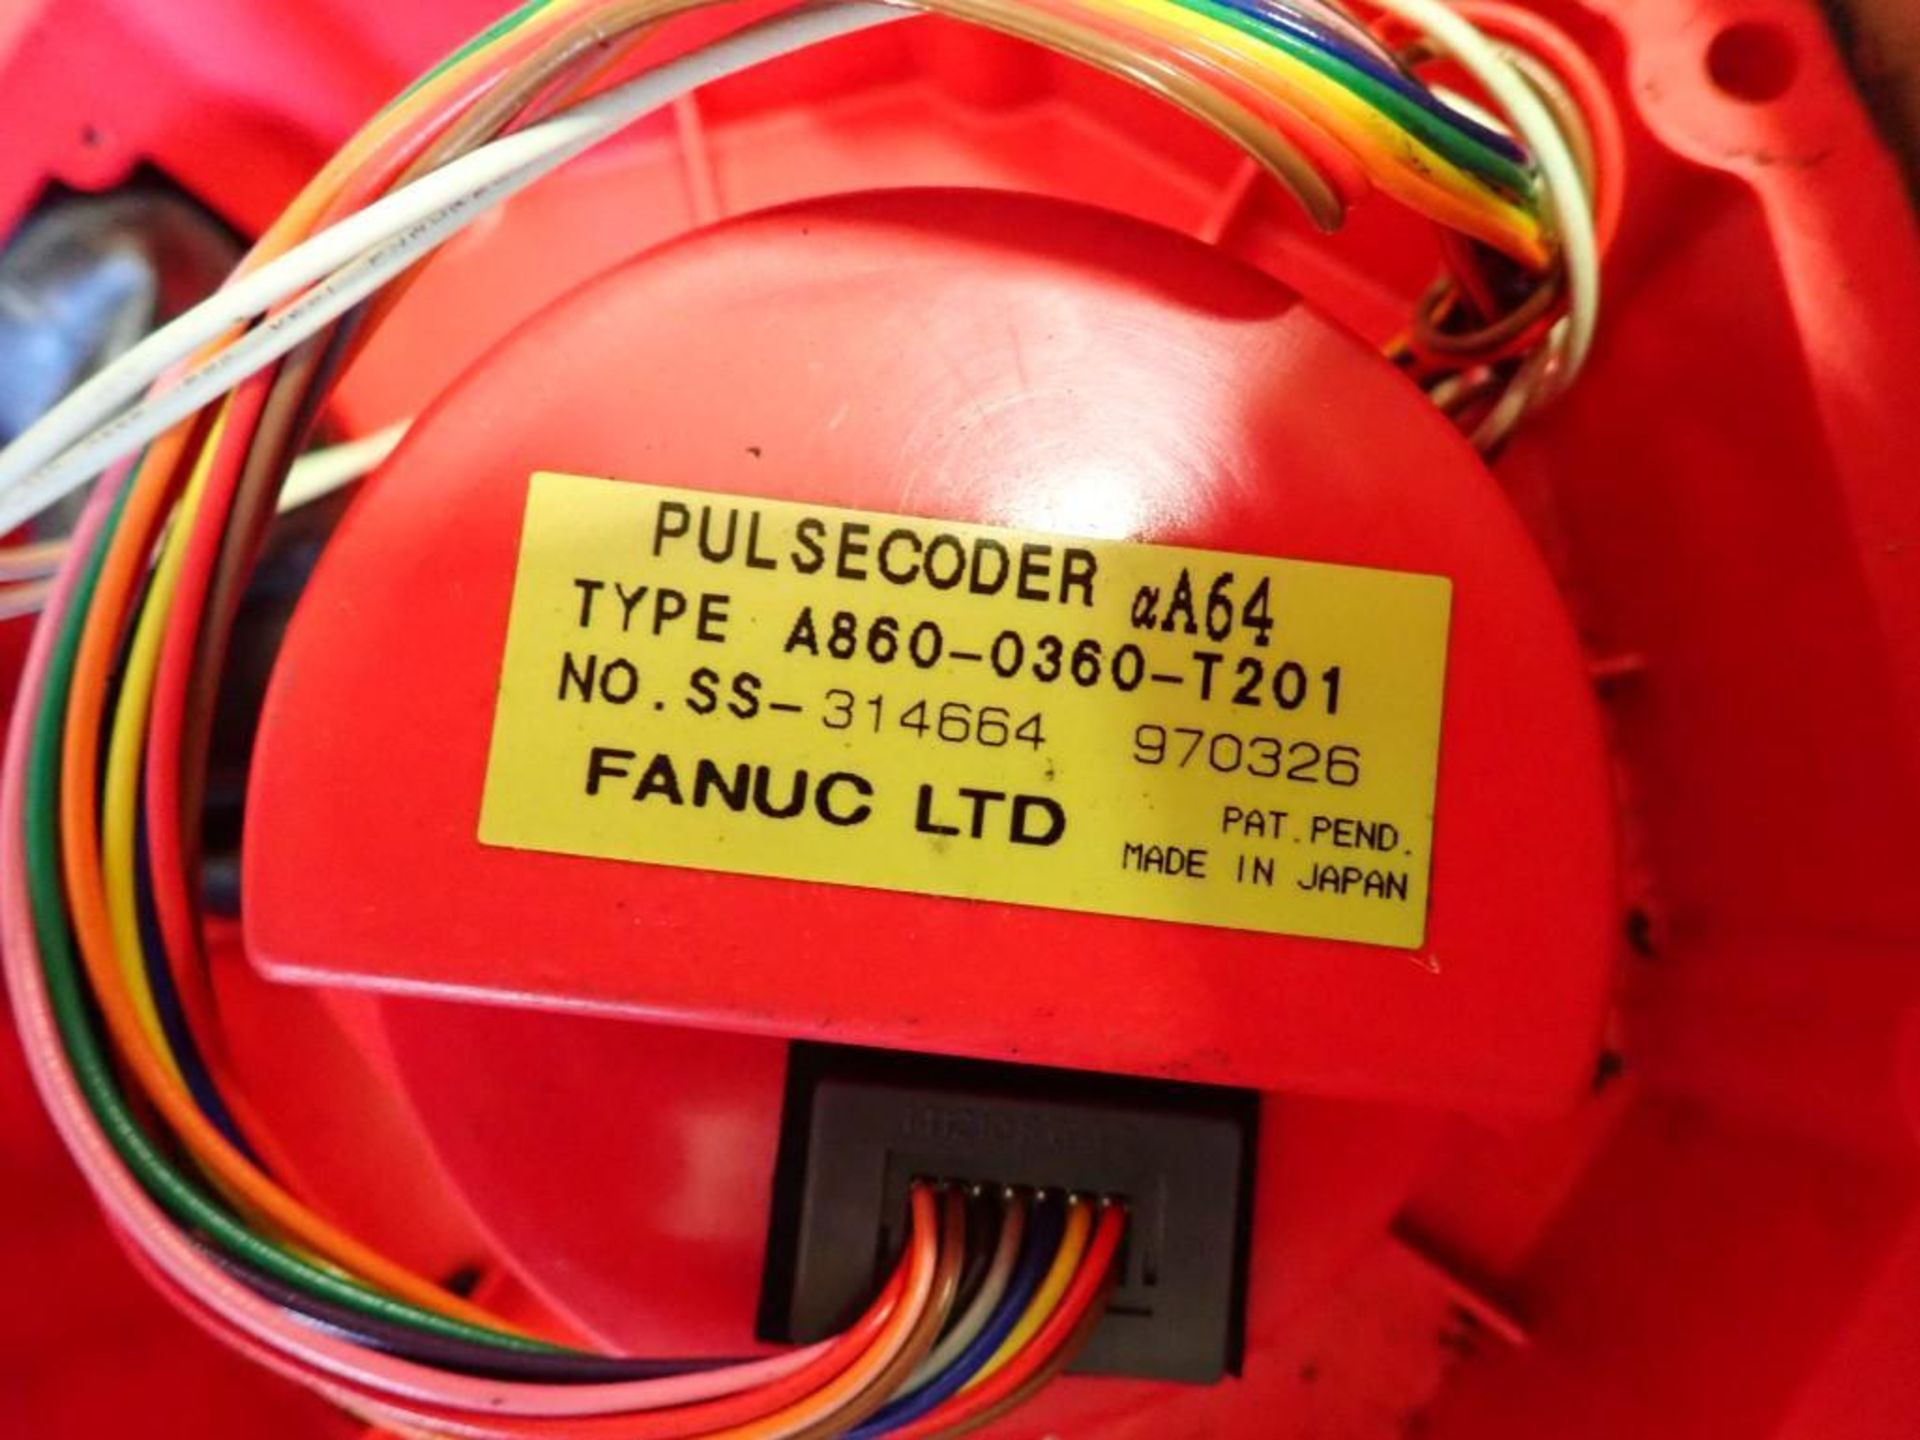 Lot of (6) Fanuc #A860-0360-T201 Pulsecoders - Image 2 of 7